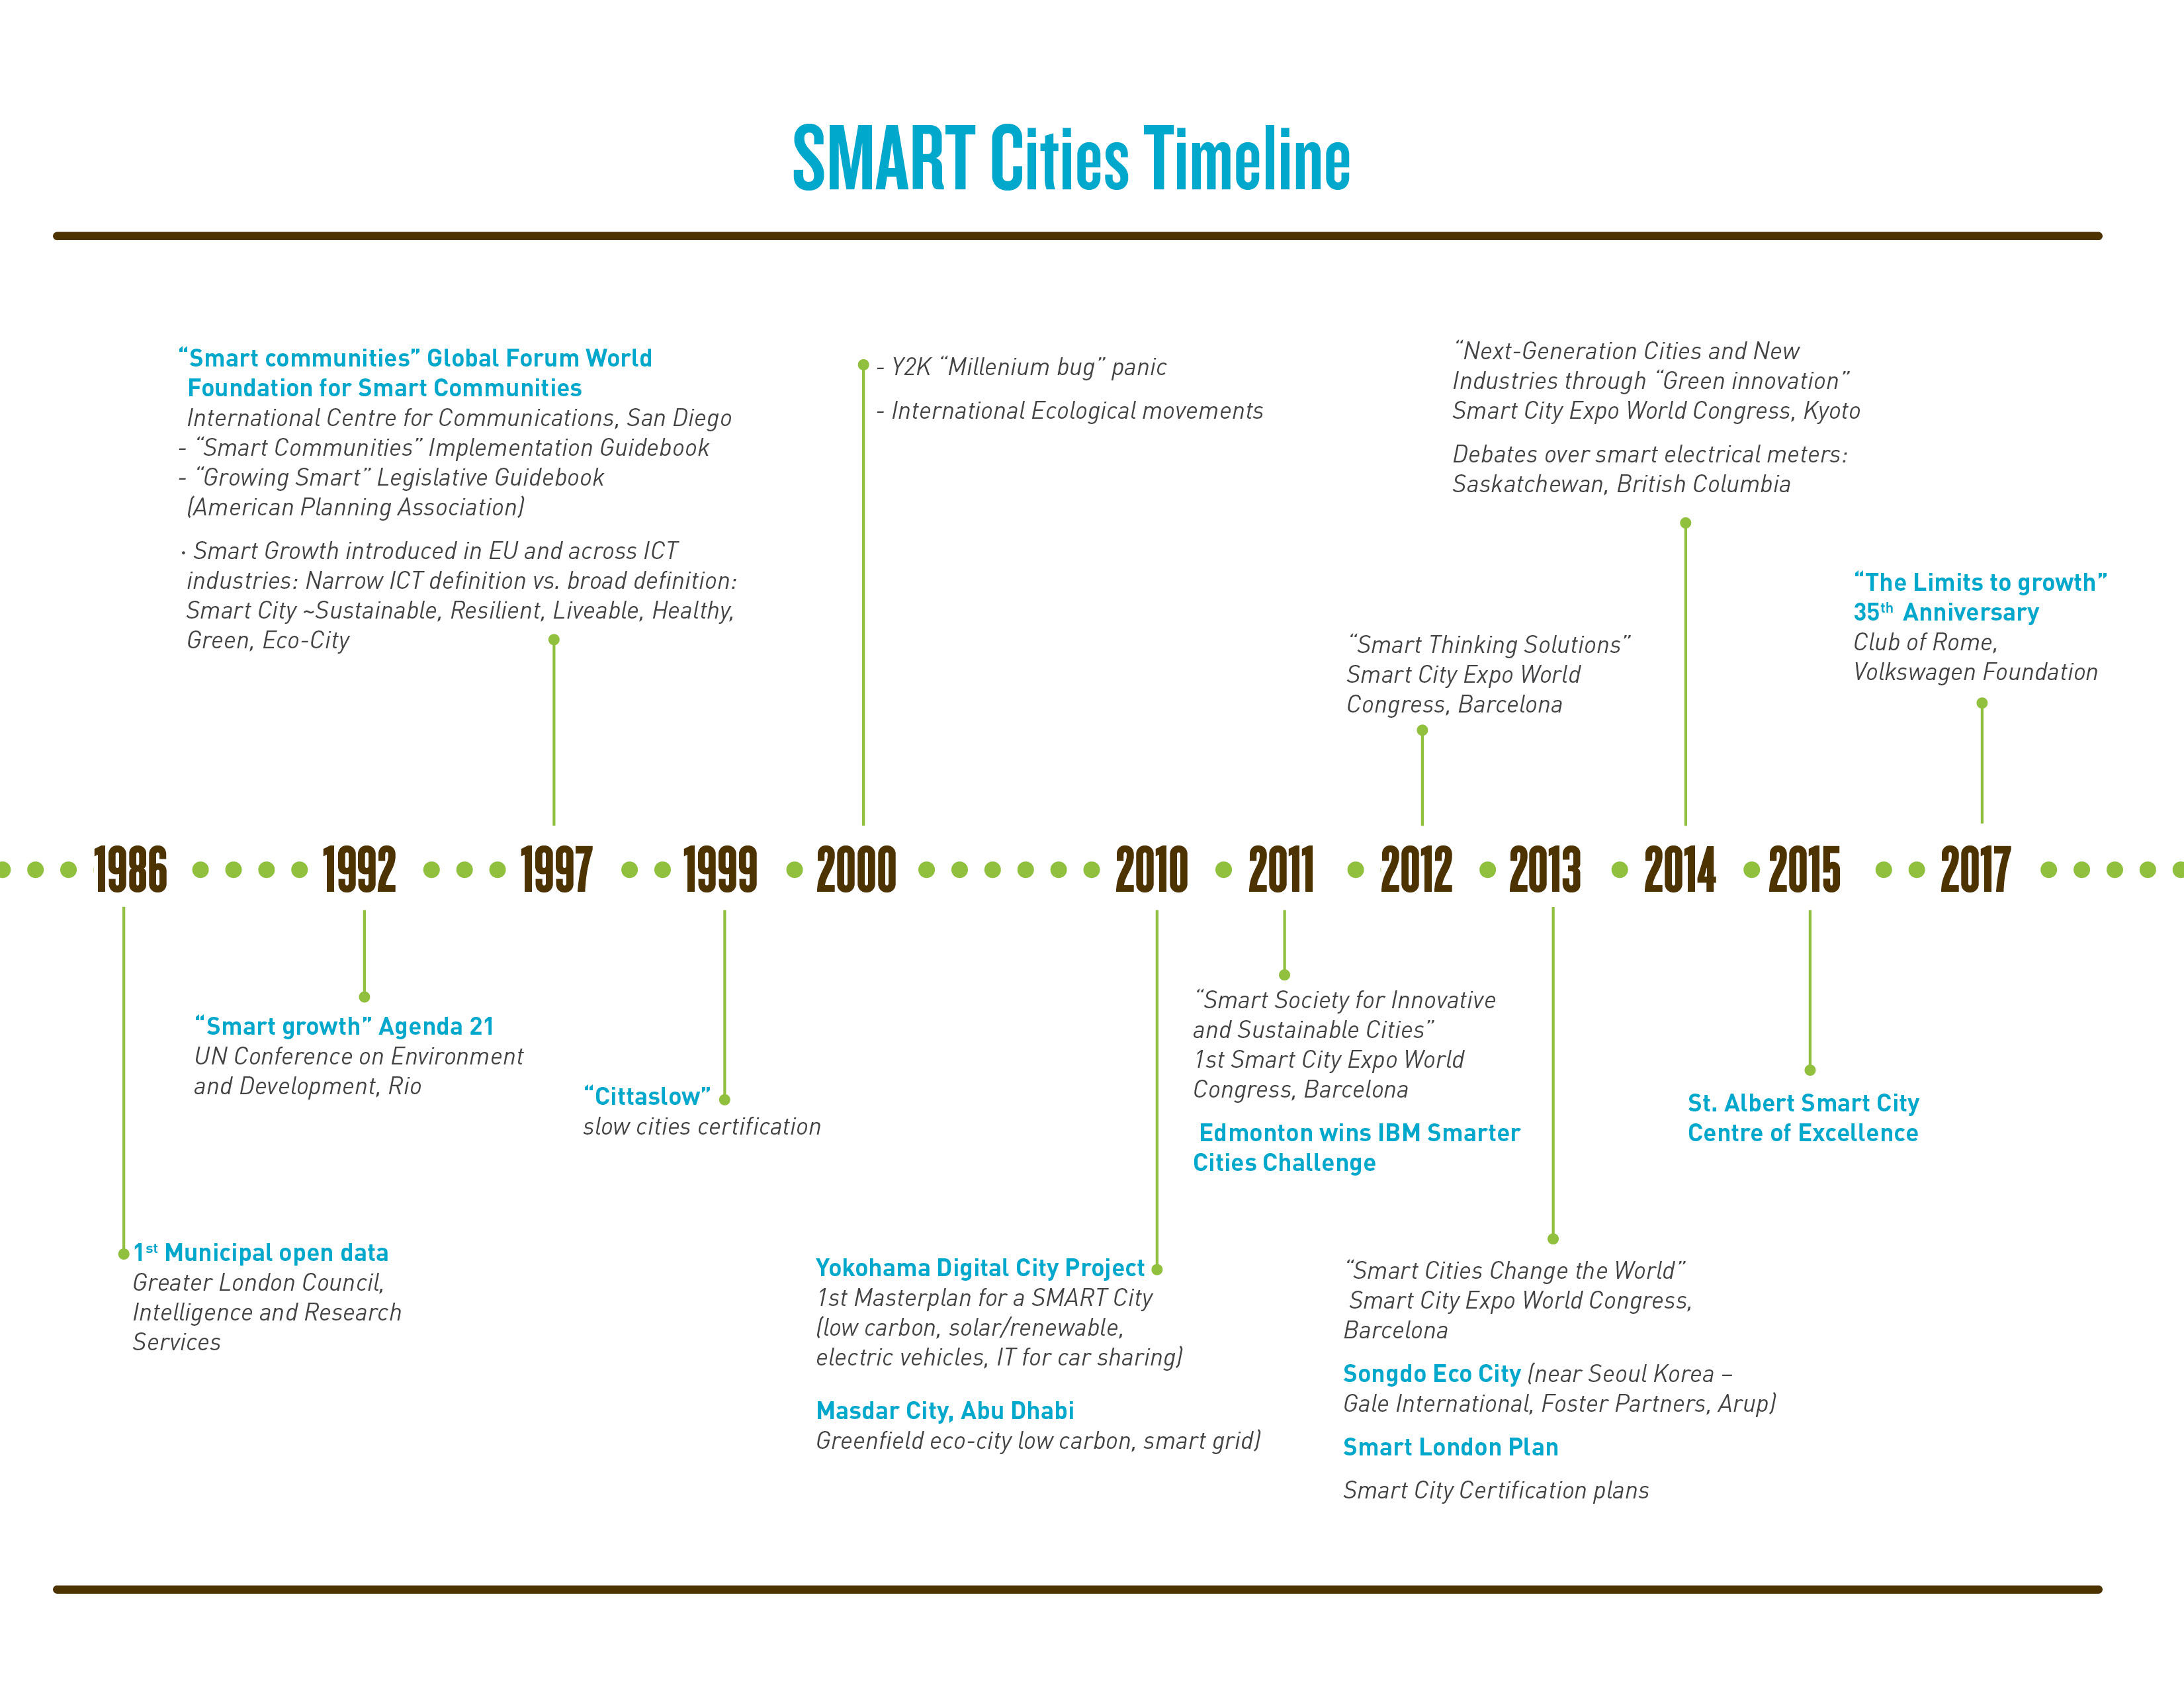 SMART Cities Timeline – SPACE AND CULTURE